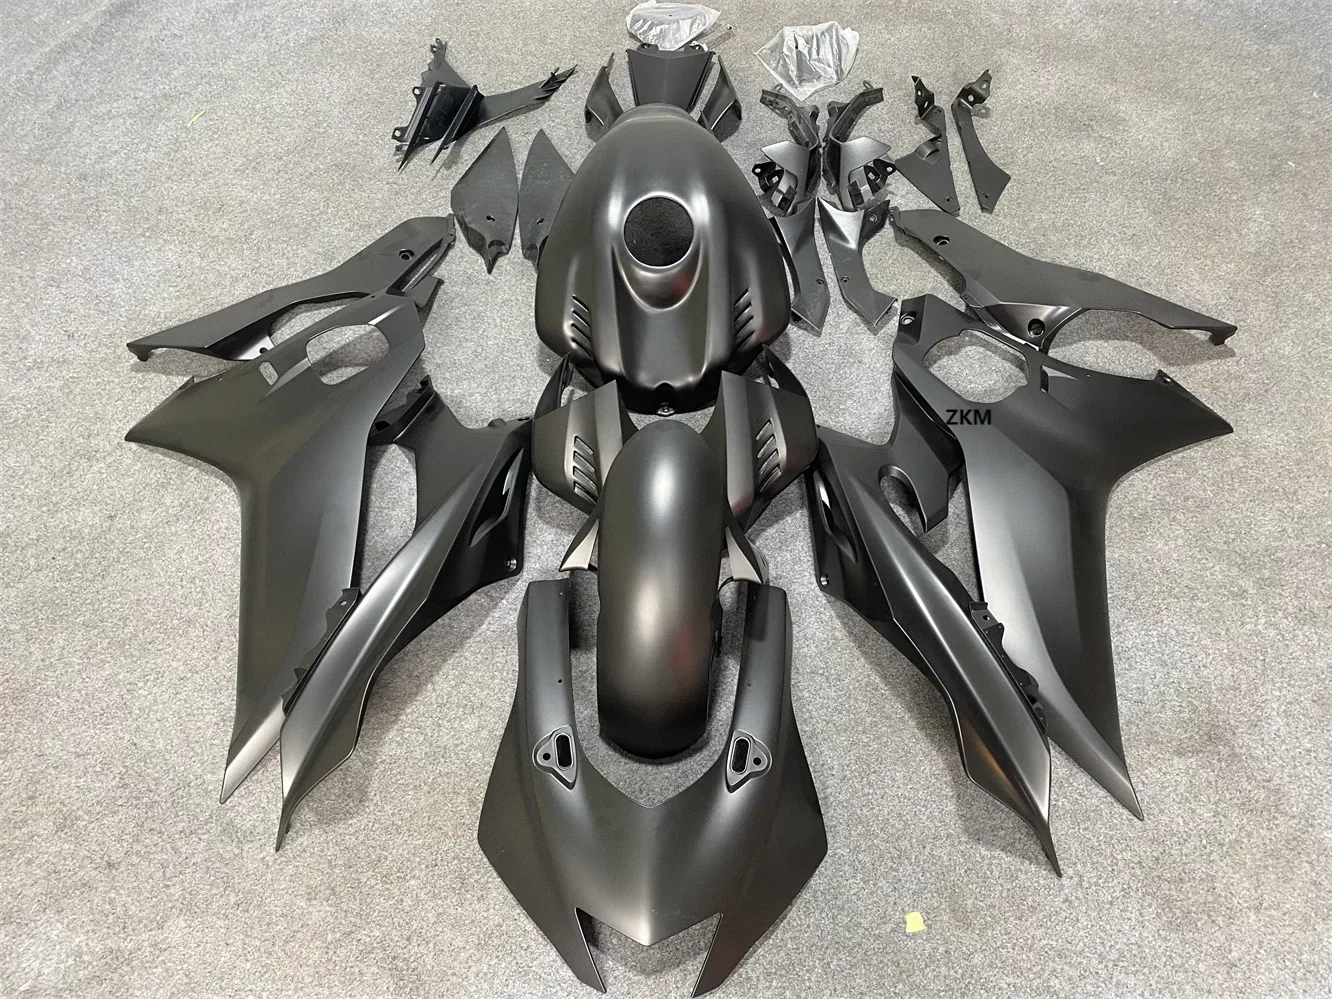 

New ABS Whole Motorcycle Fairing Kit Fit Bodywork For YAMAHA YZF R6 2017 2018 2019 2020 17 18 19 20 Brilliantly Matte black